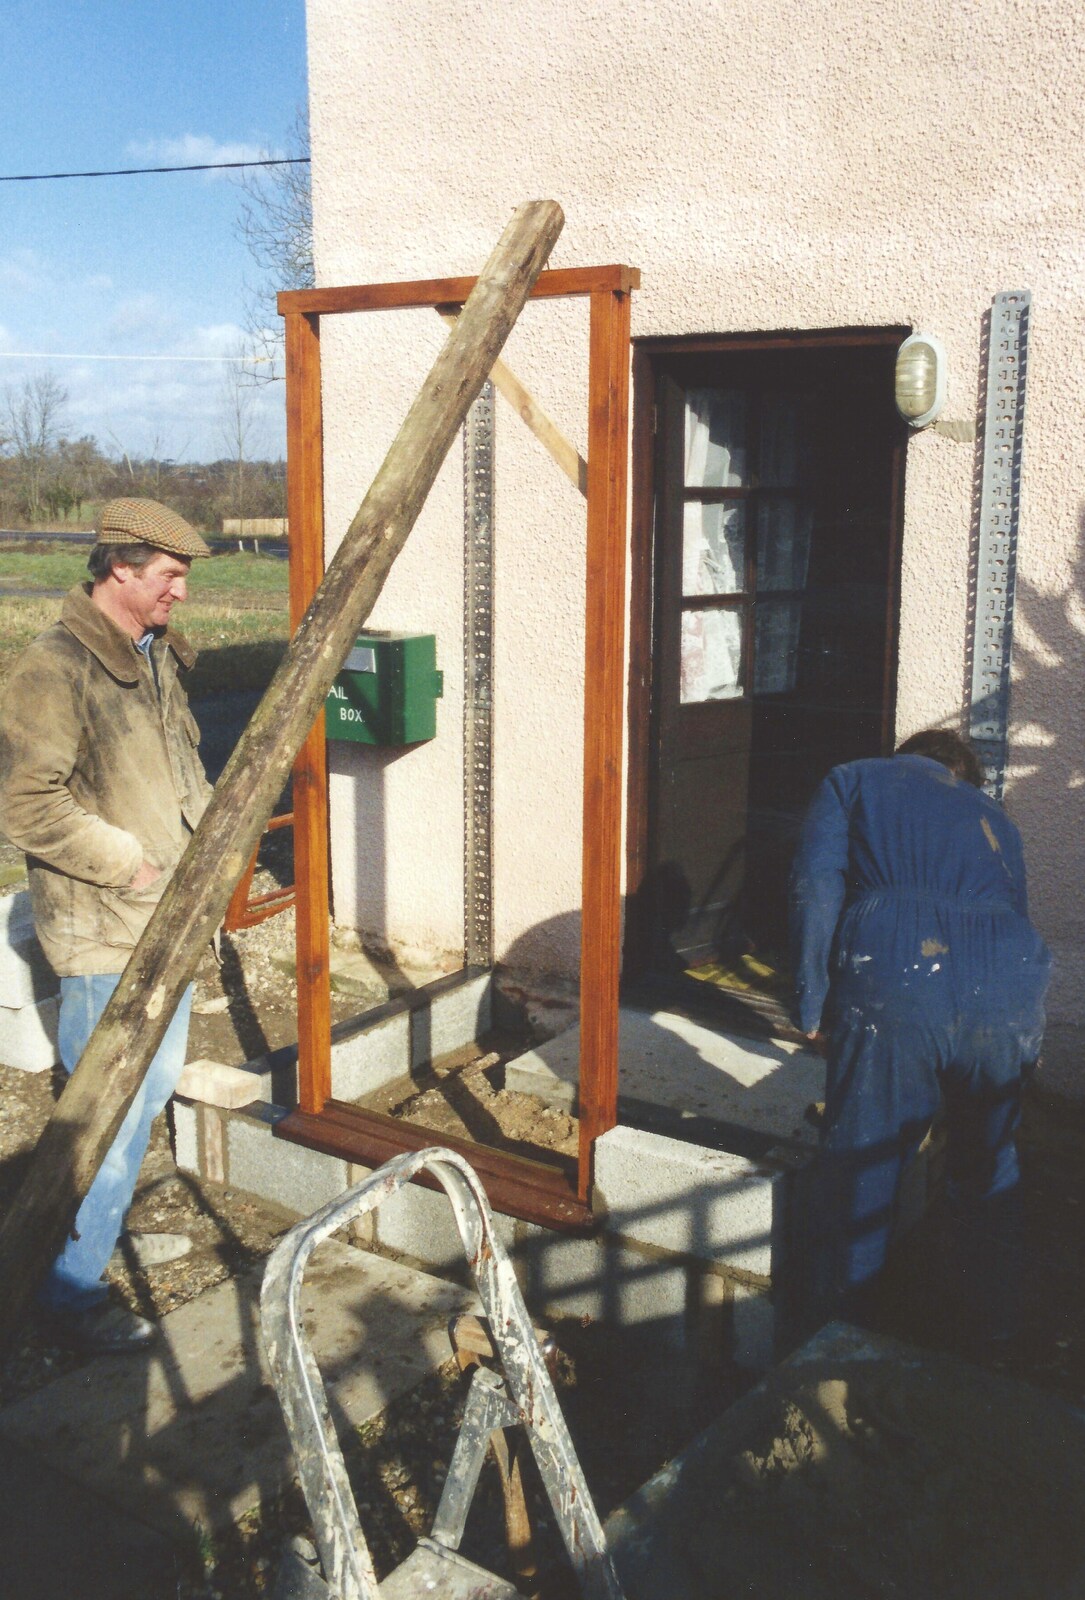 Bernie starts on the blockwork from Bernie and the Porch, The Stables, Stuston, Suffolk - 15th March 1991